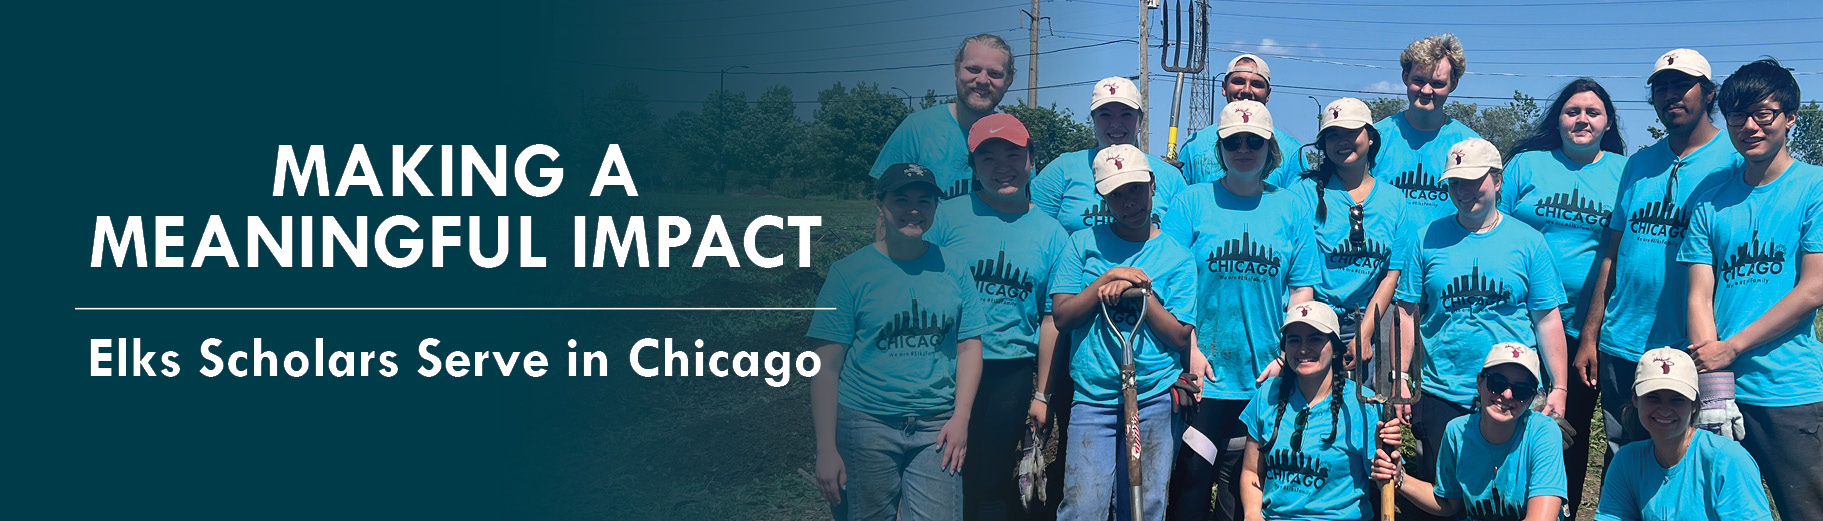 Making a Meaningful Impact: Elks Scholars Serve in Chicago